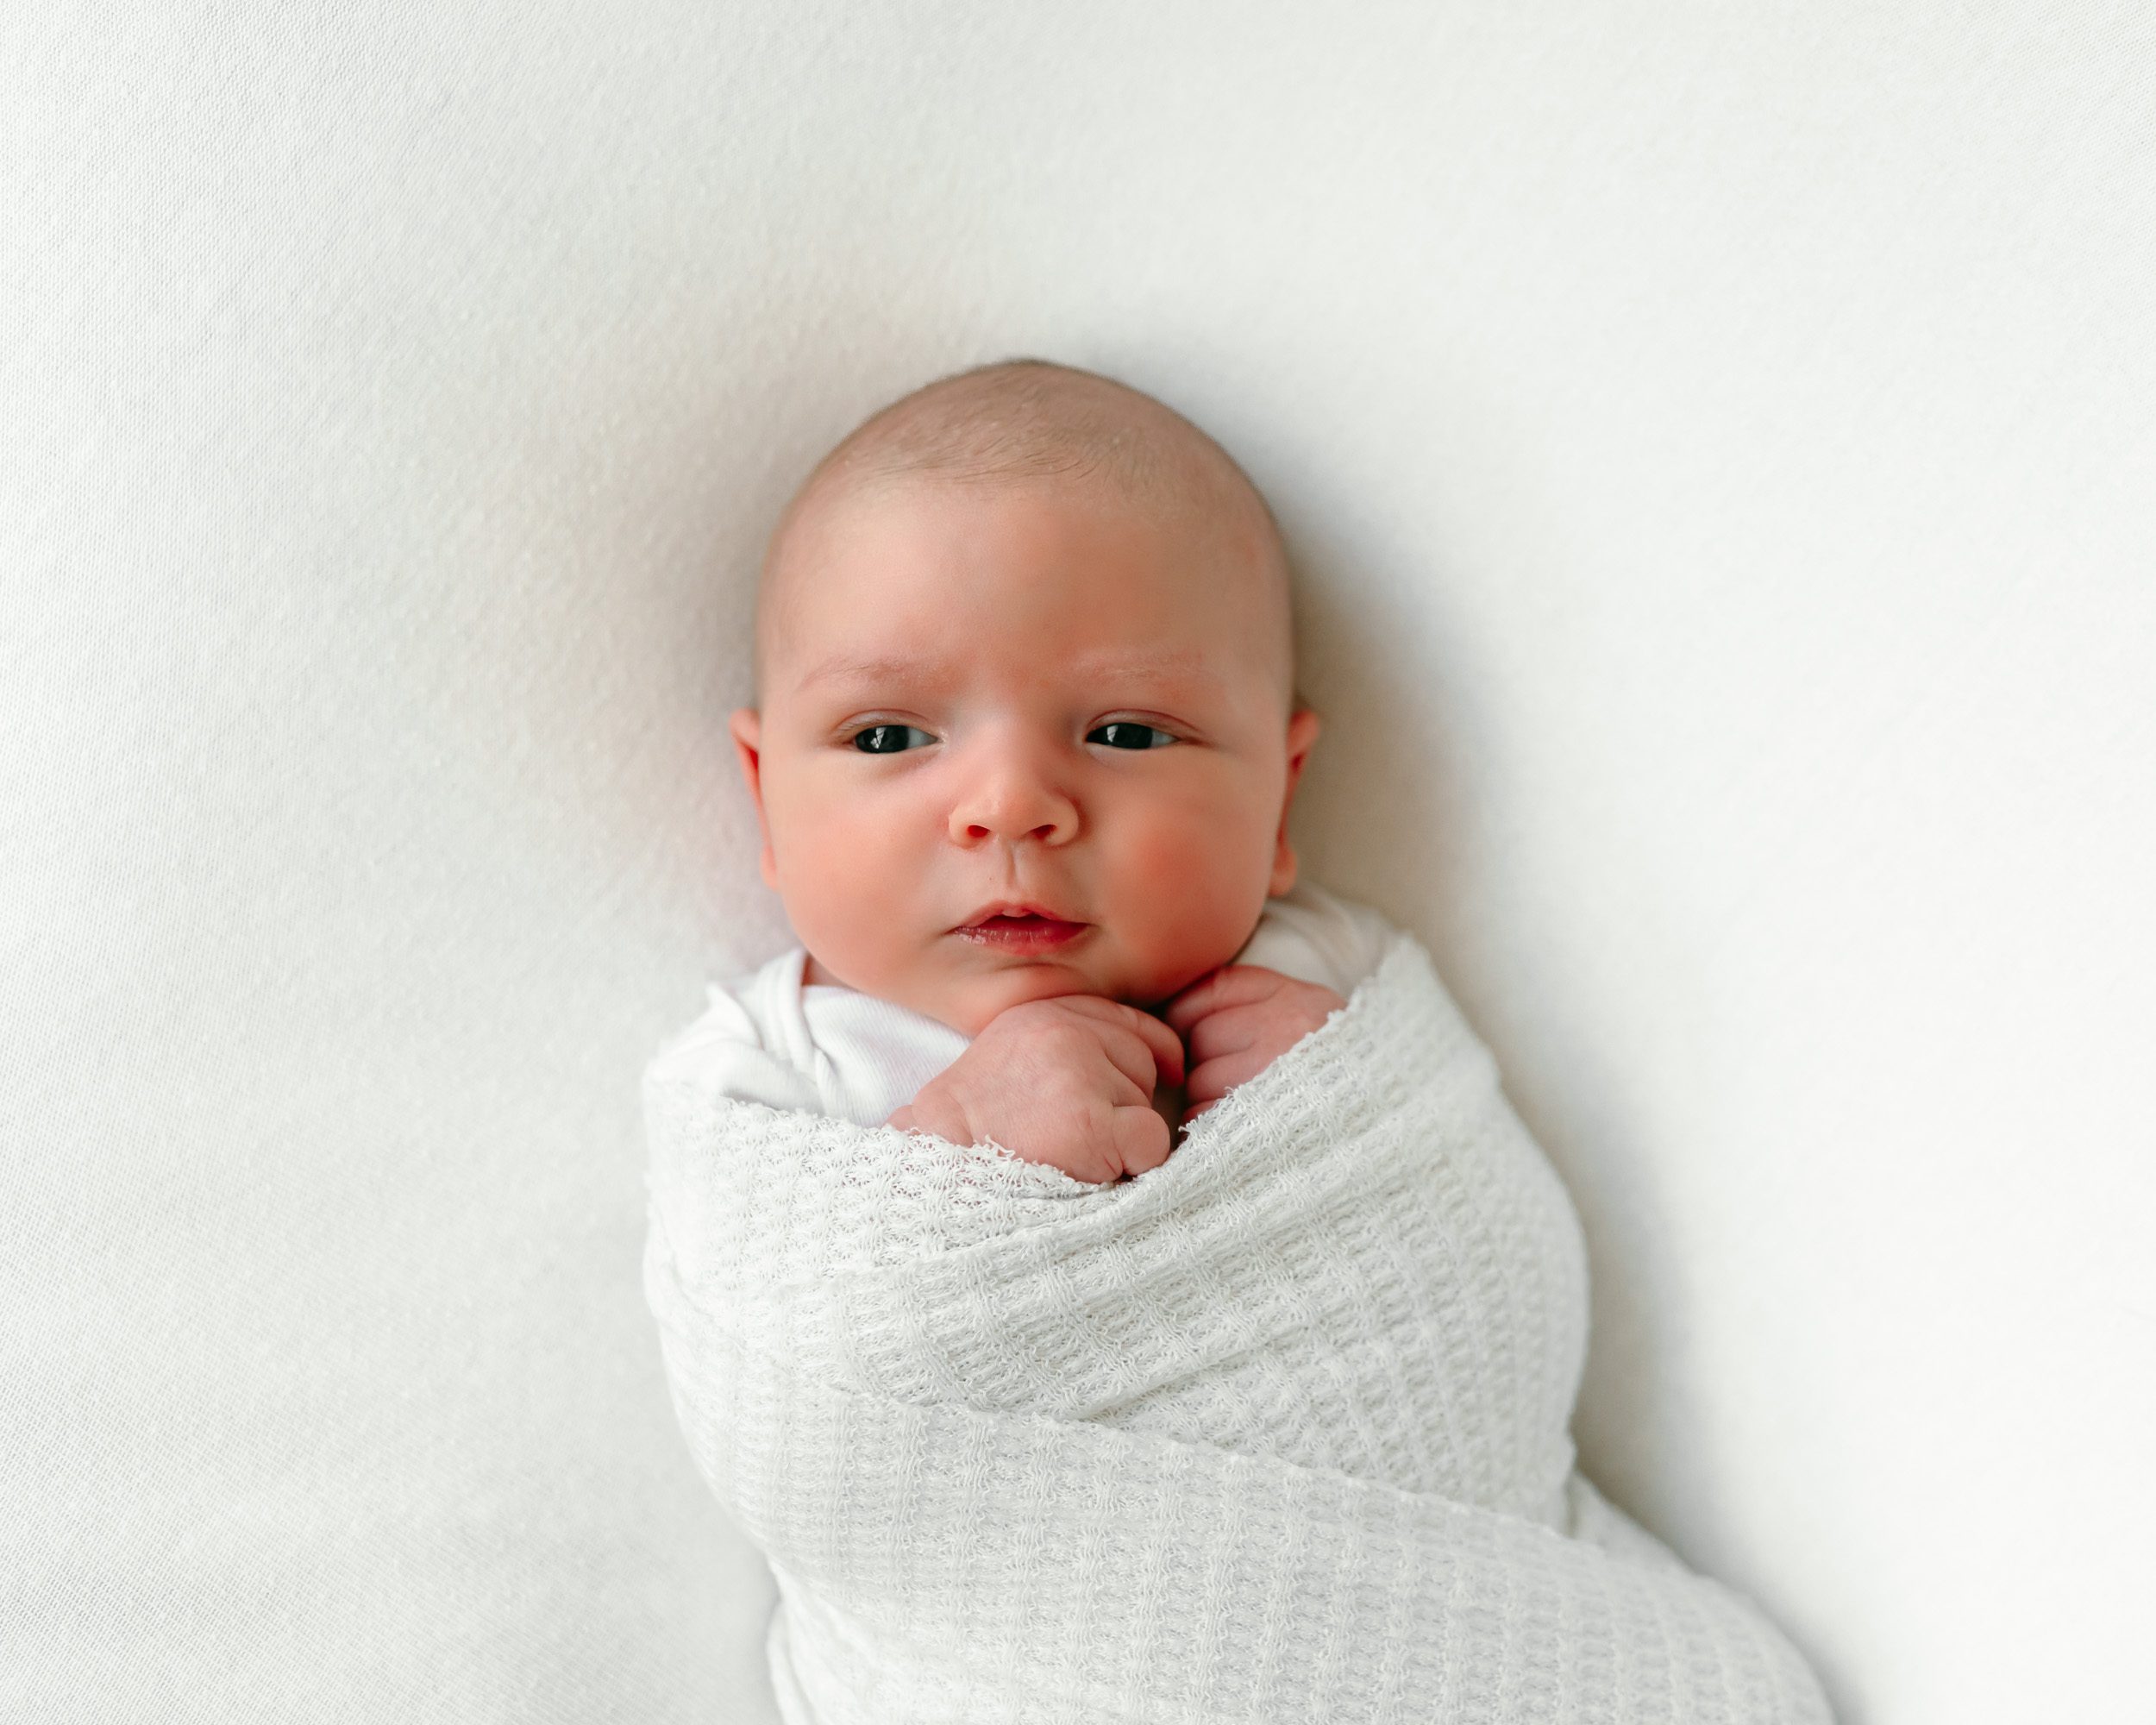 An older baby wrapped in a white textured swaddle laying on a white backdrop during a newborn photos session